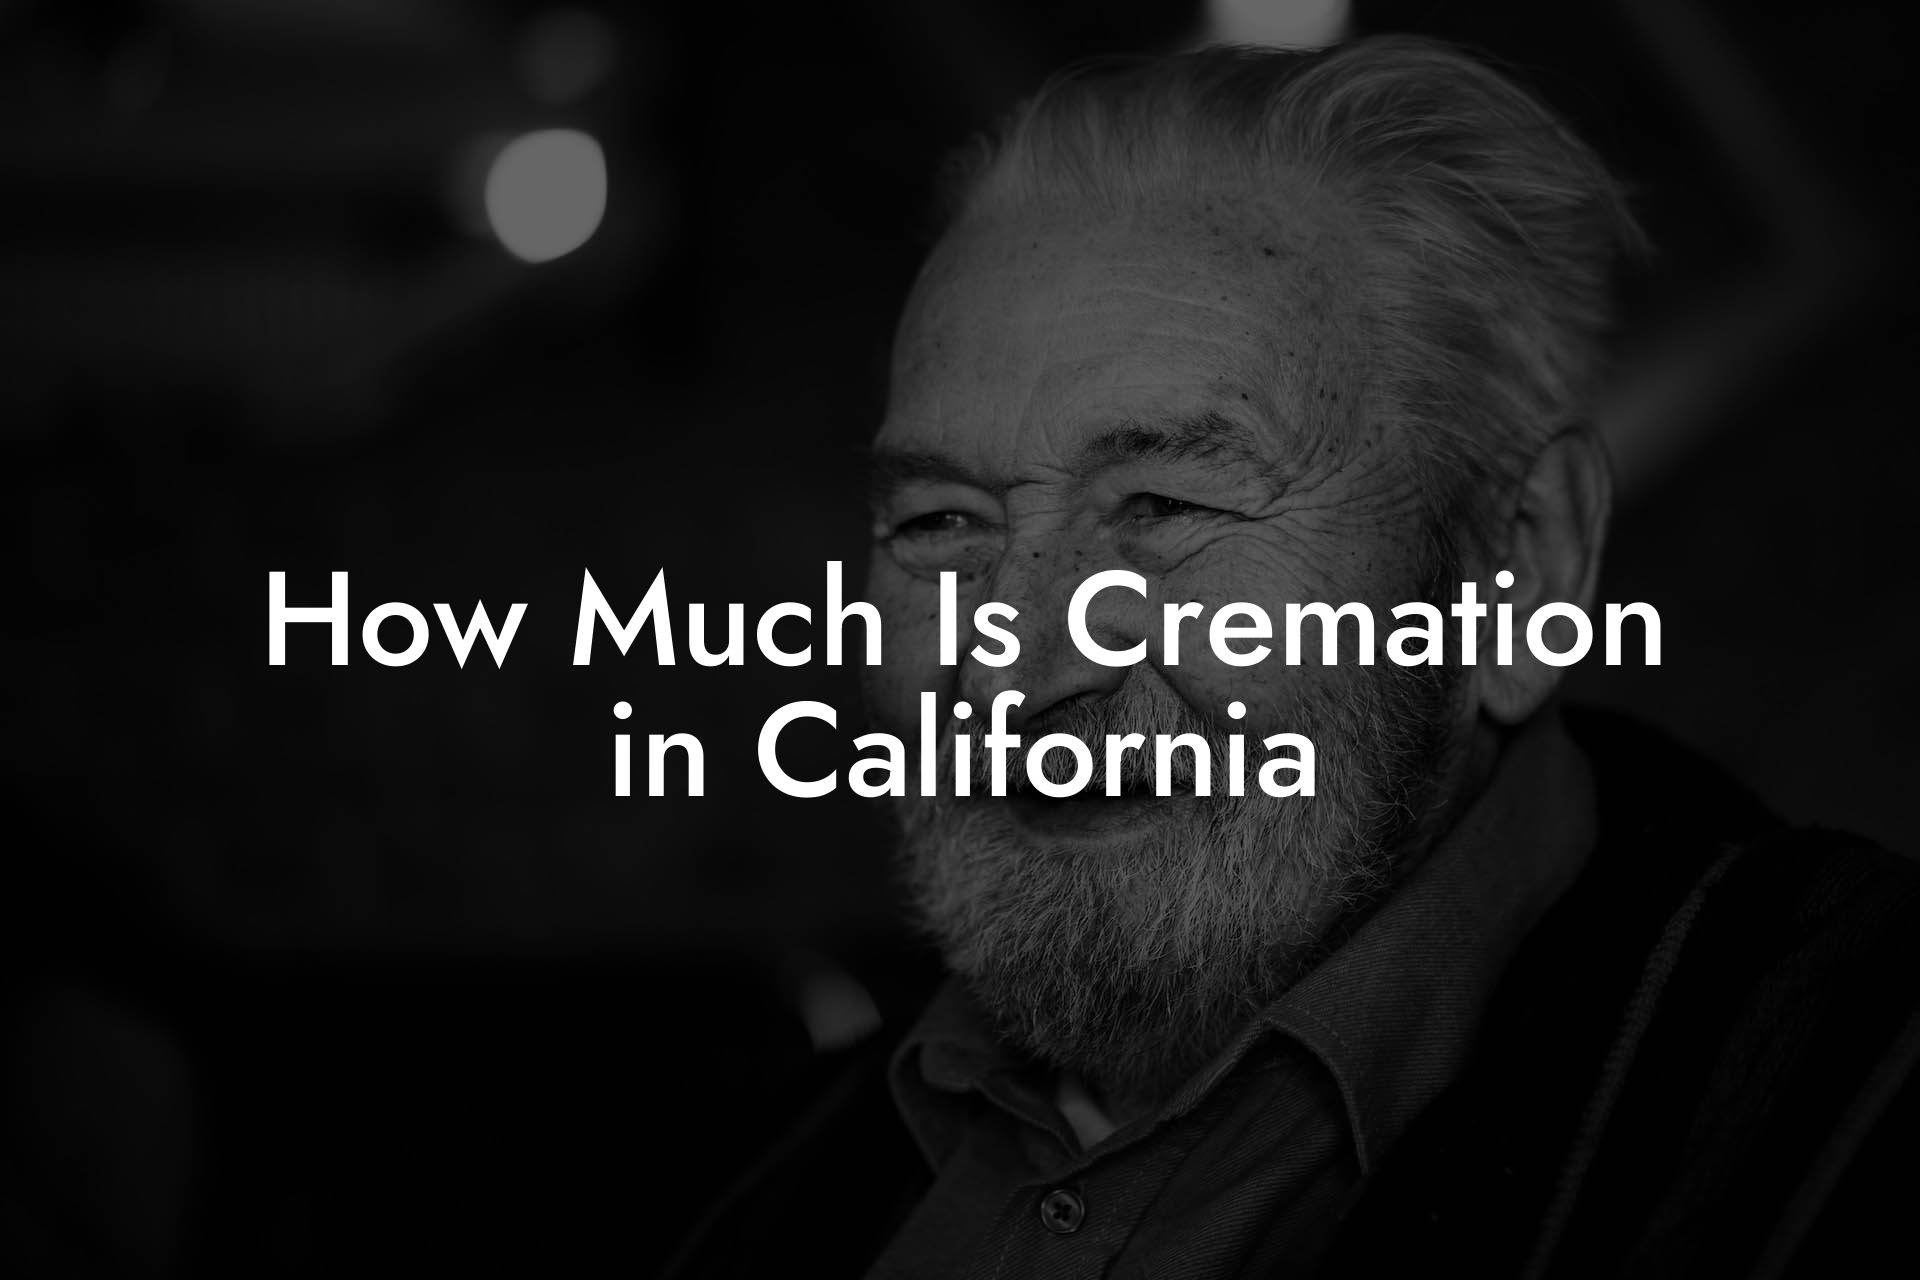 How Much Is Cremation in California